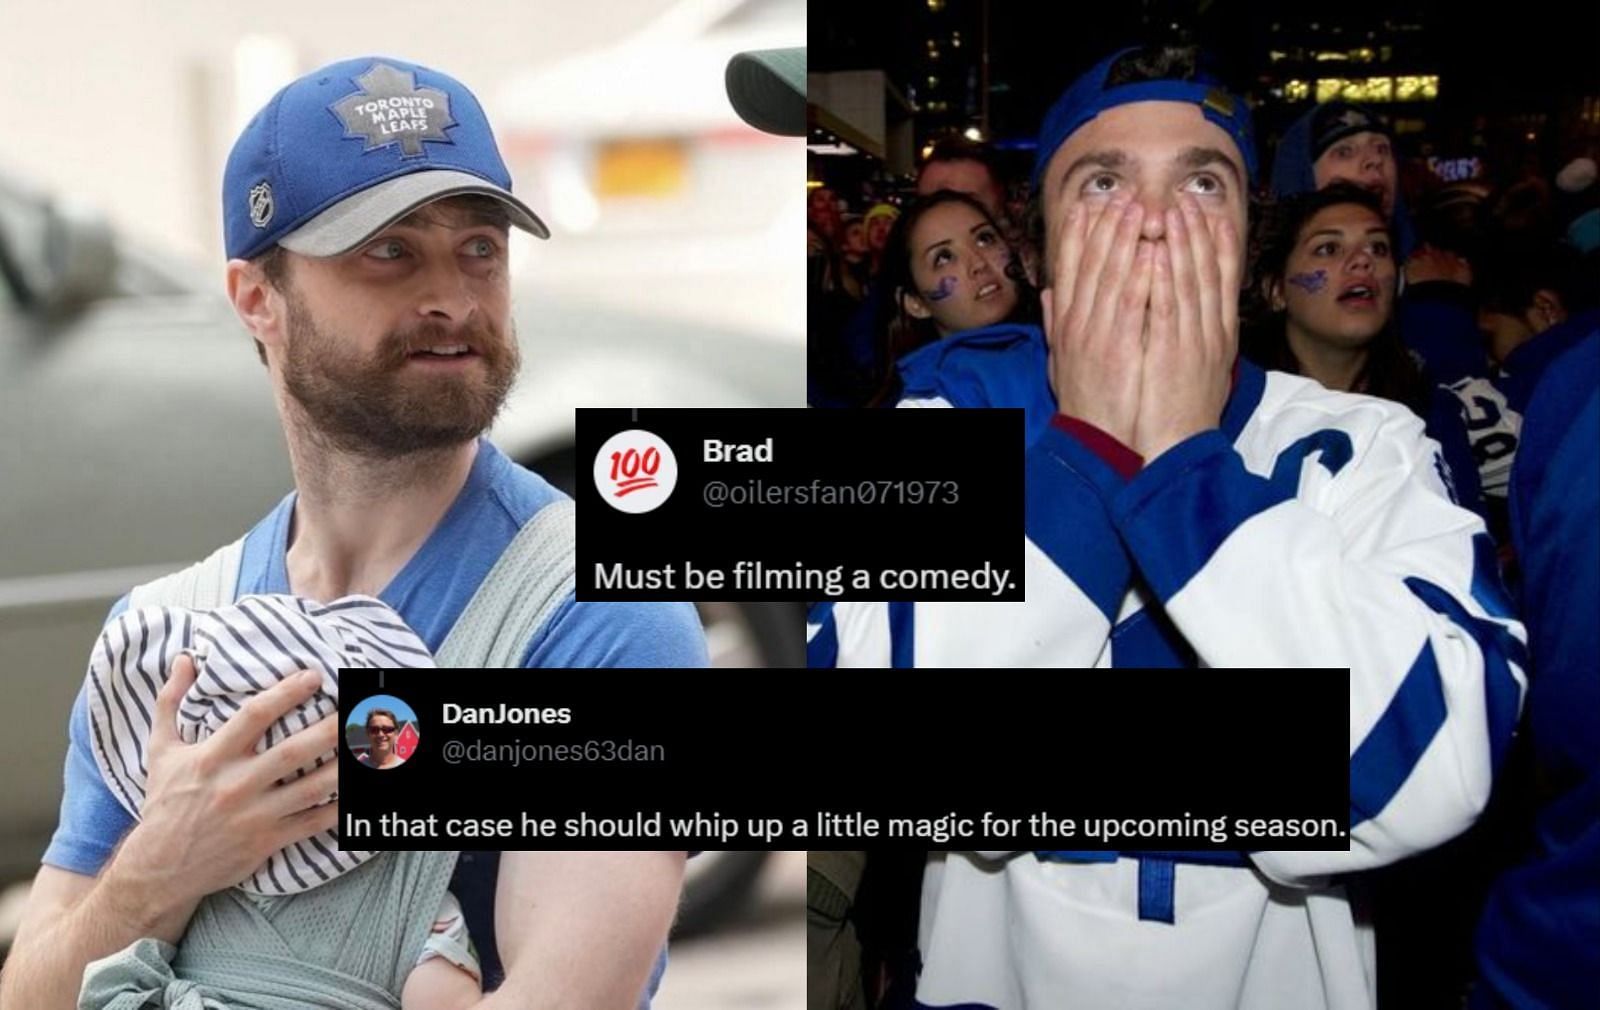 Toronto Maple Leafs fans in awe of Harry Potter star donning team